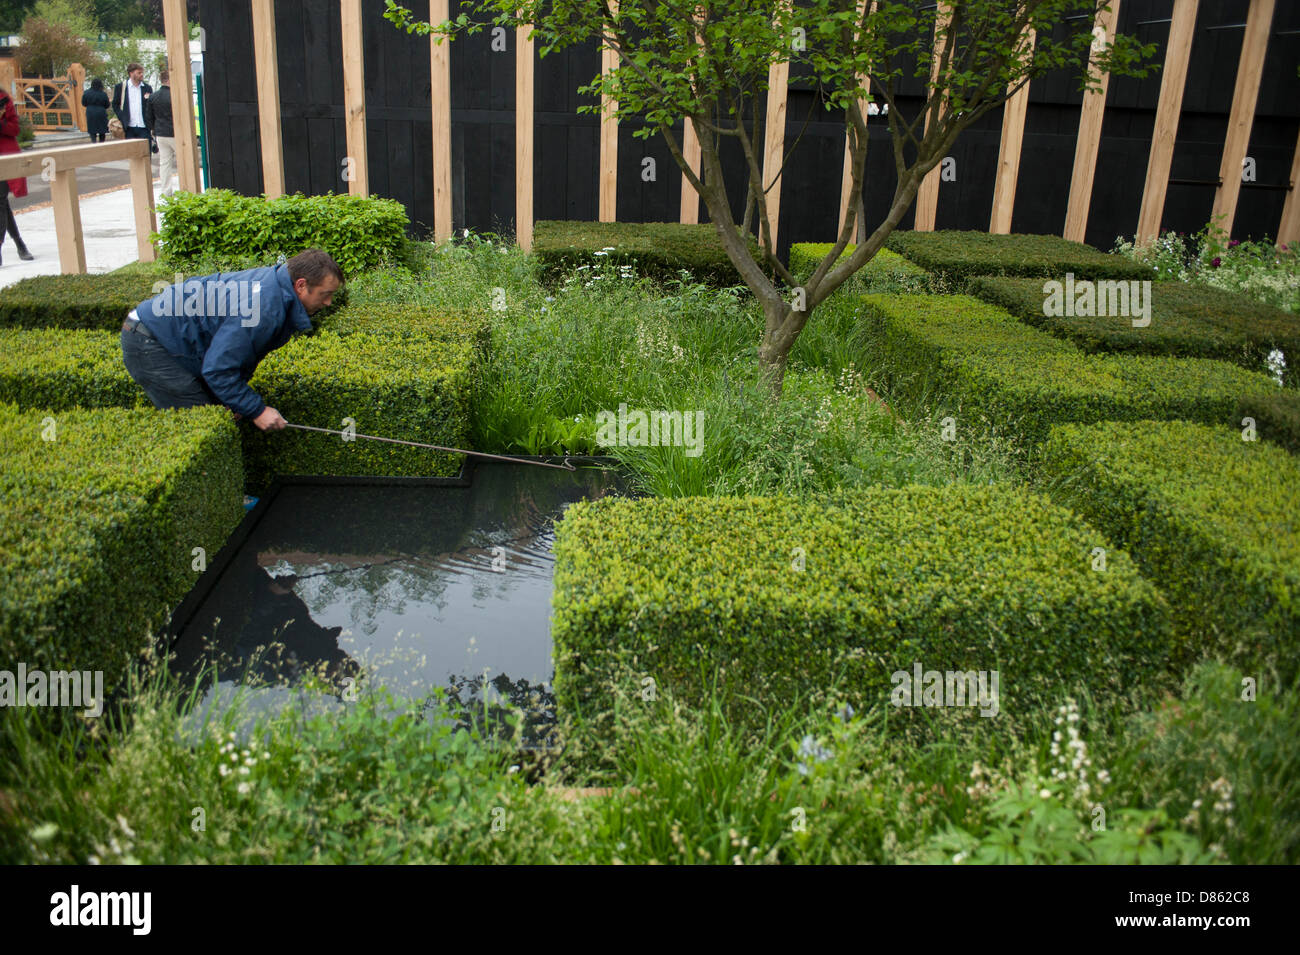 20.5.2013, London, UK. Finishing touches to The Daily Telegraph Garden designed by Christopher Bradley-Hole at the RHS Chelsea Flower Show. Stock Photo